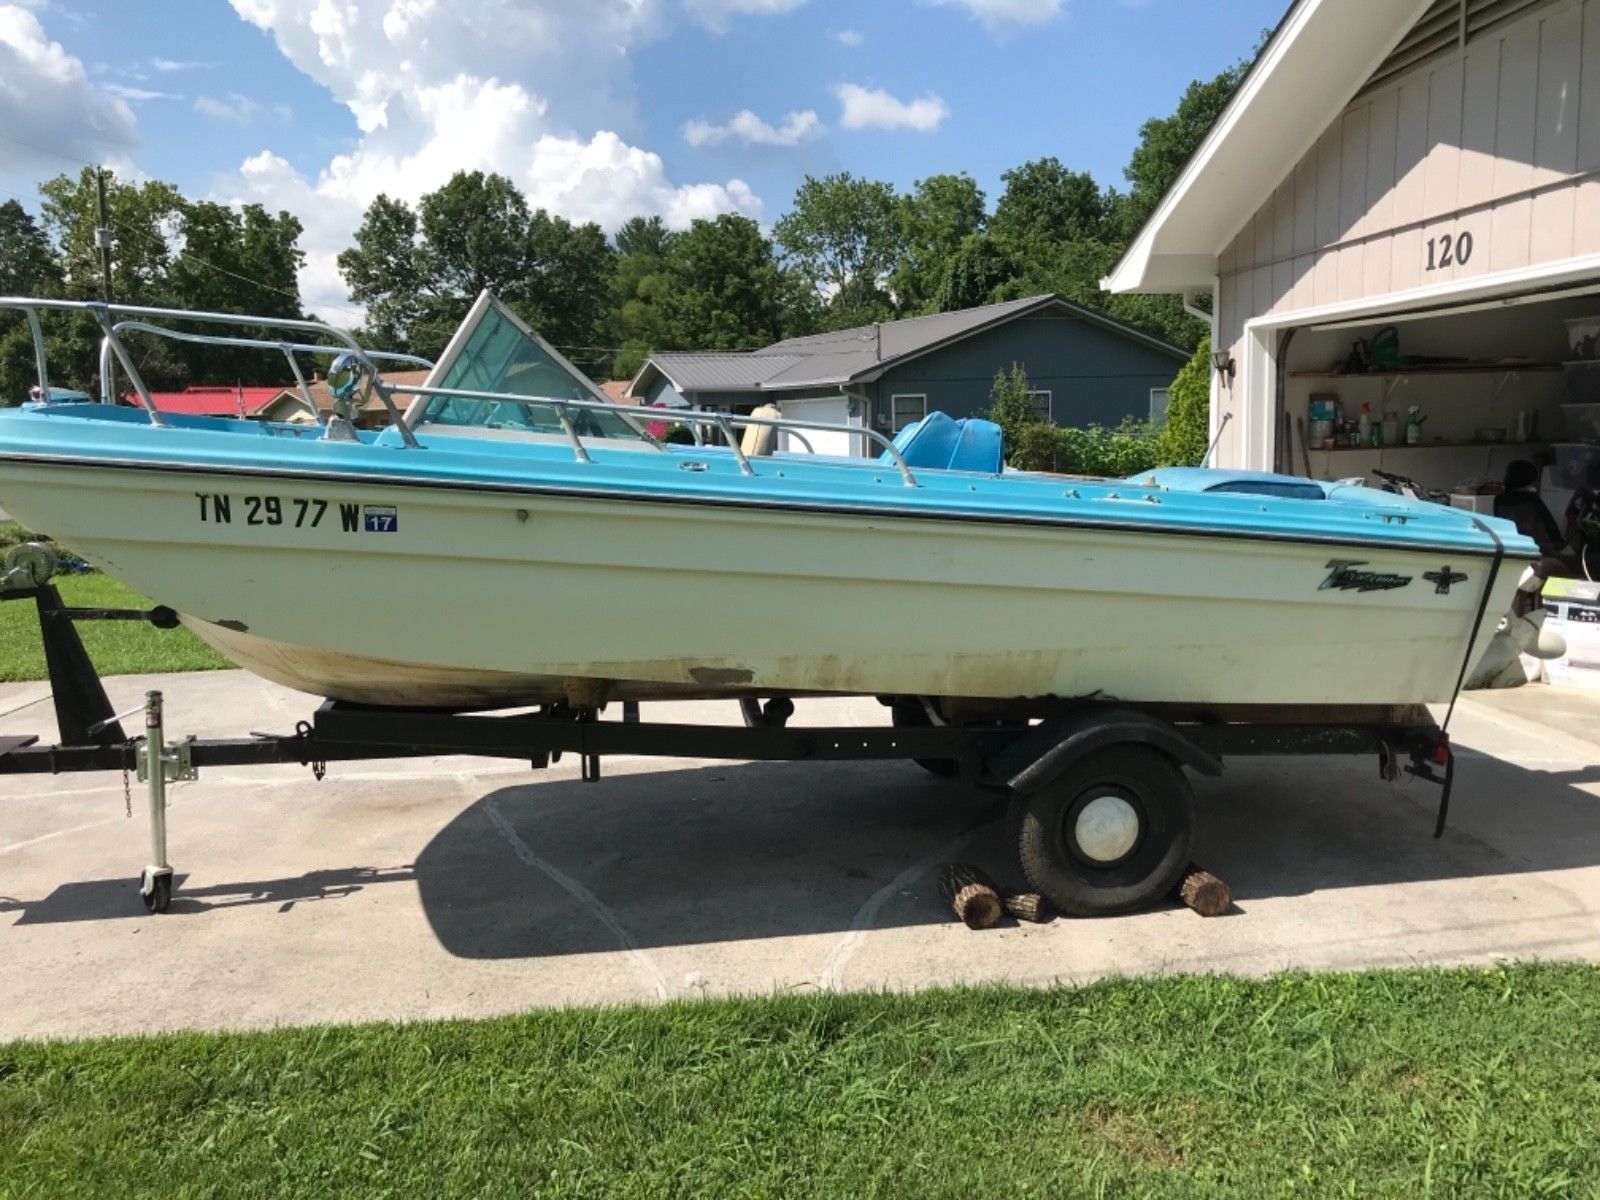 Thunderhawk 1972 for sale for $200 - Boats-from-USA.com